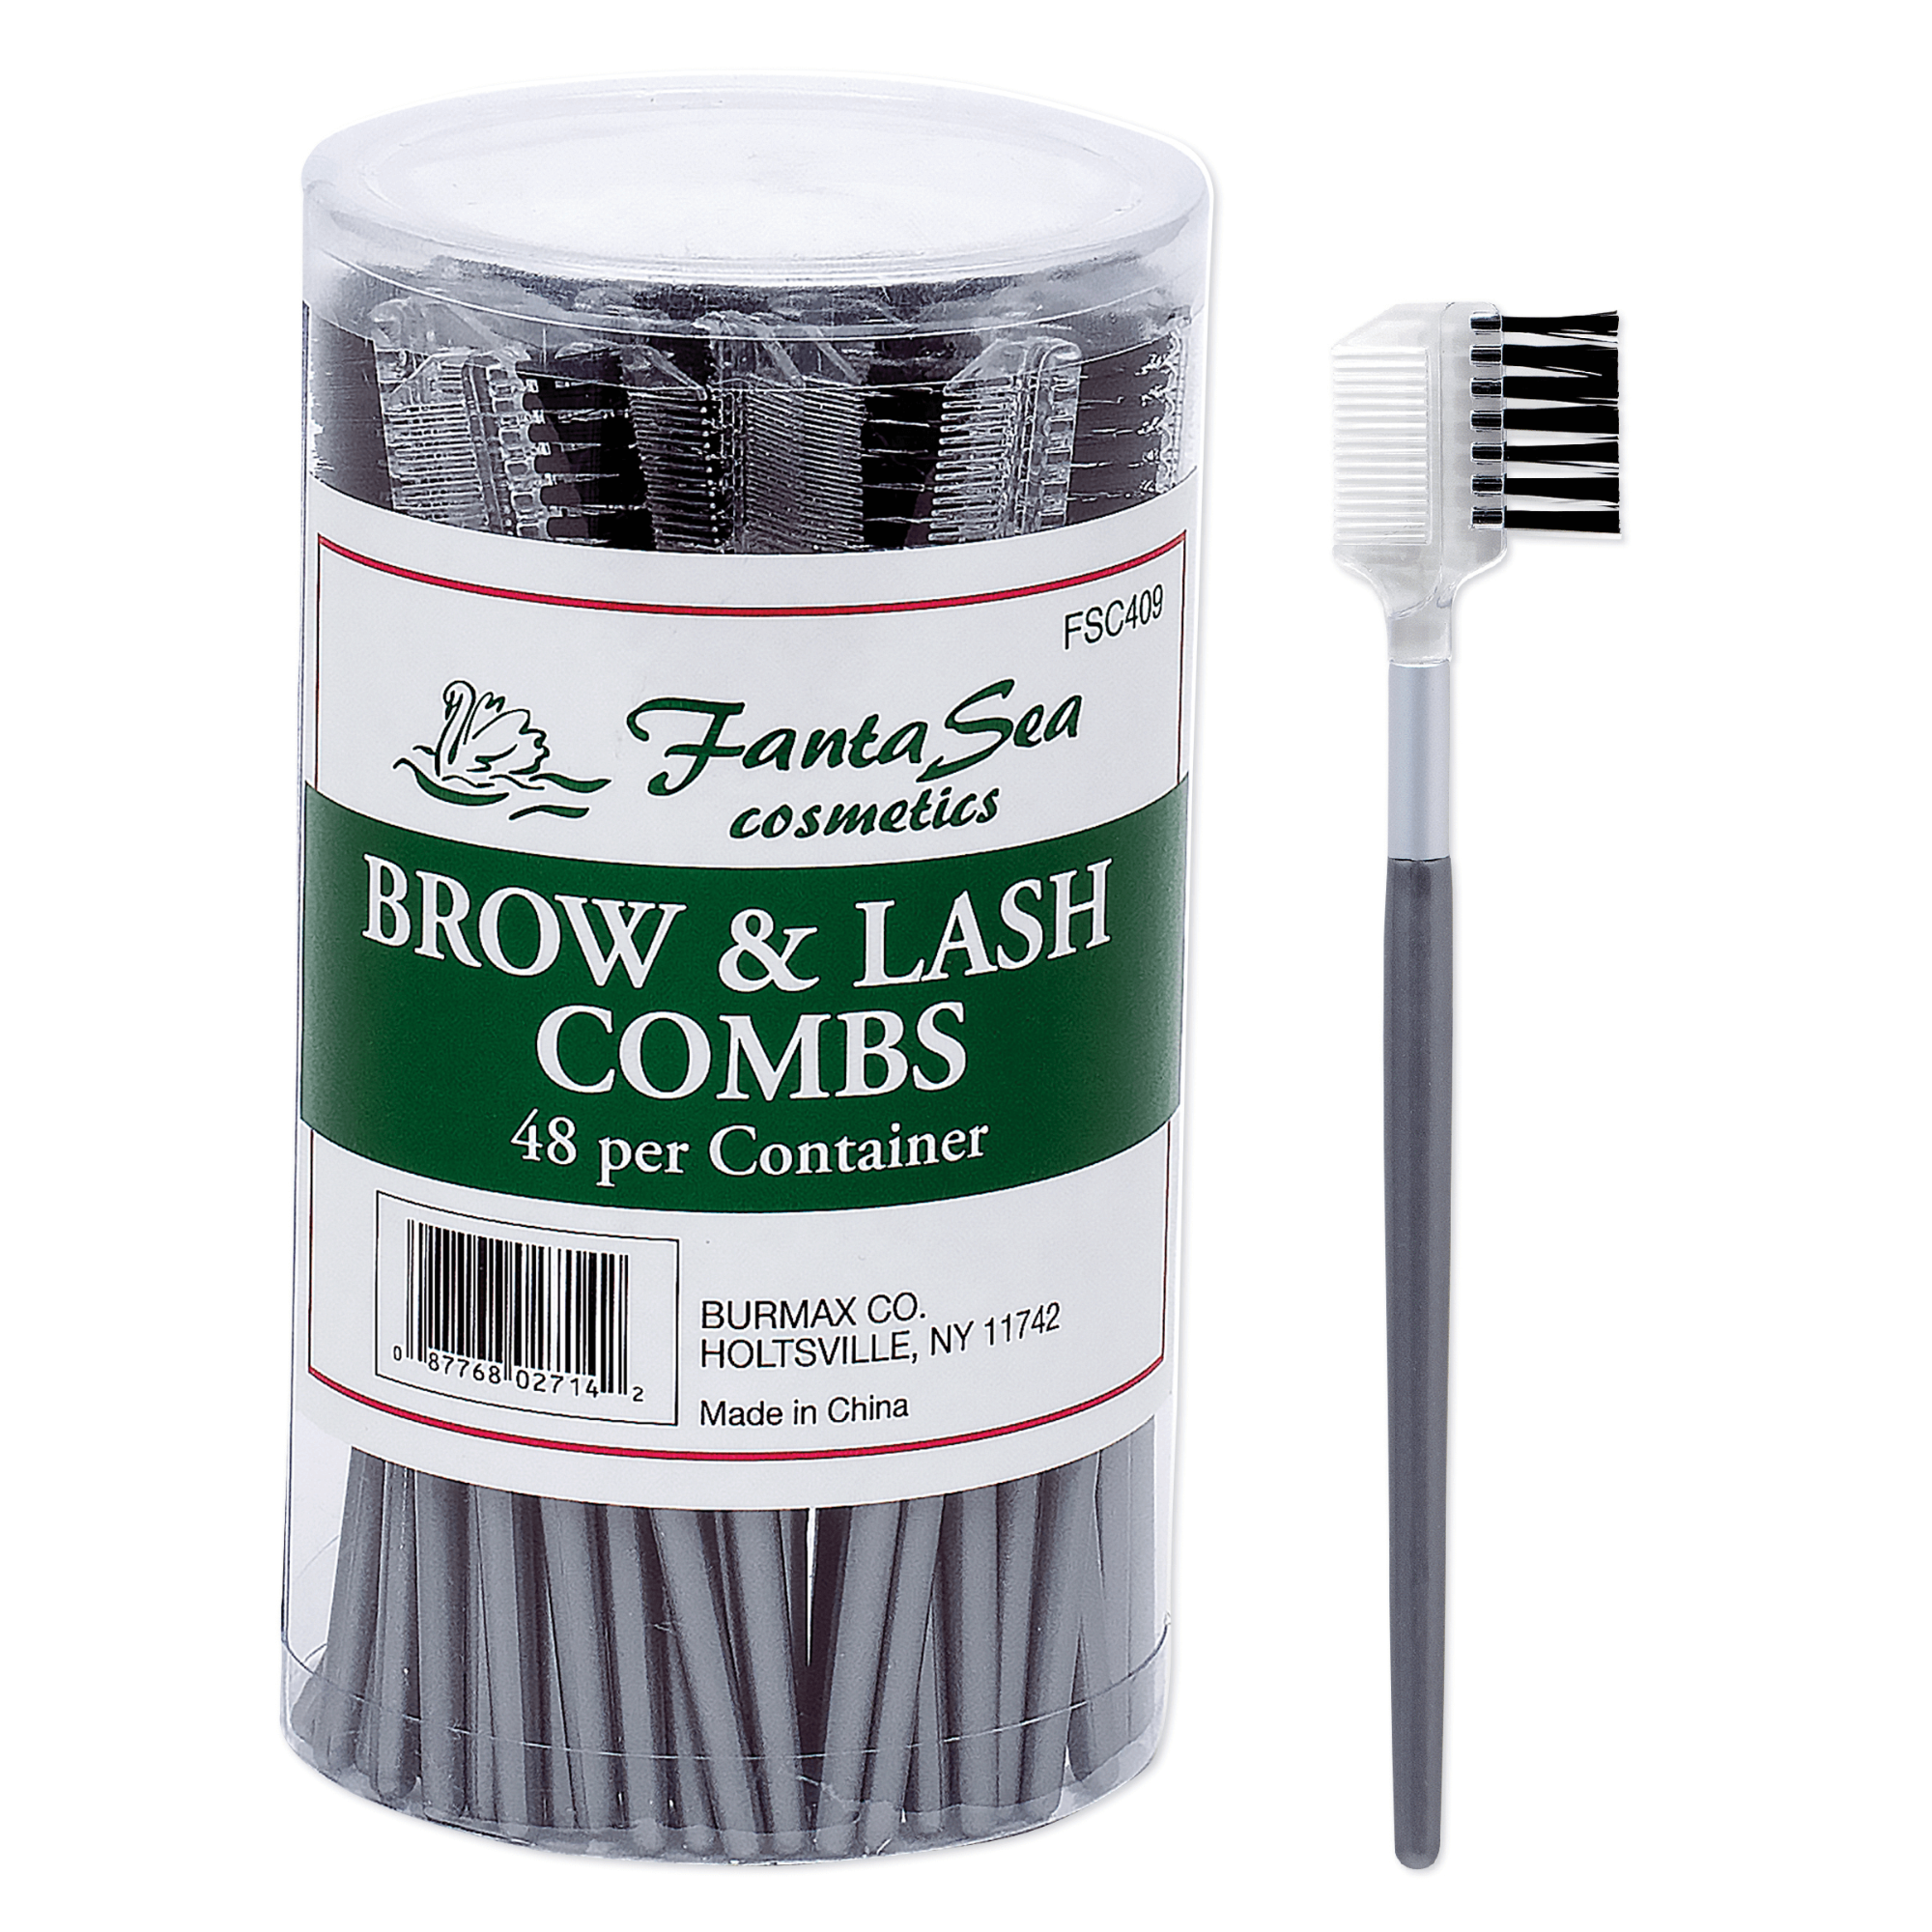 Brow & Lash Combs - Container of 48